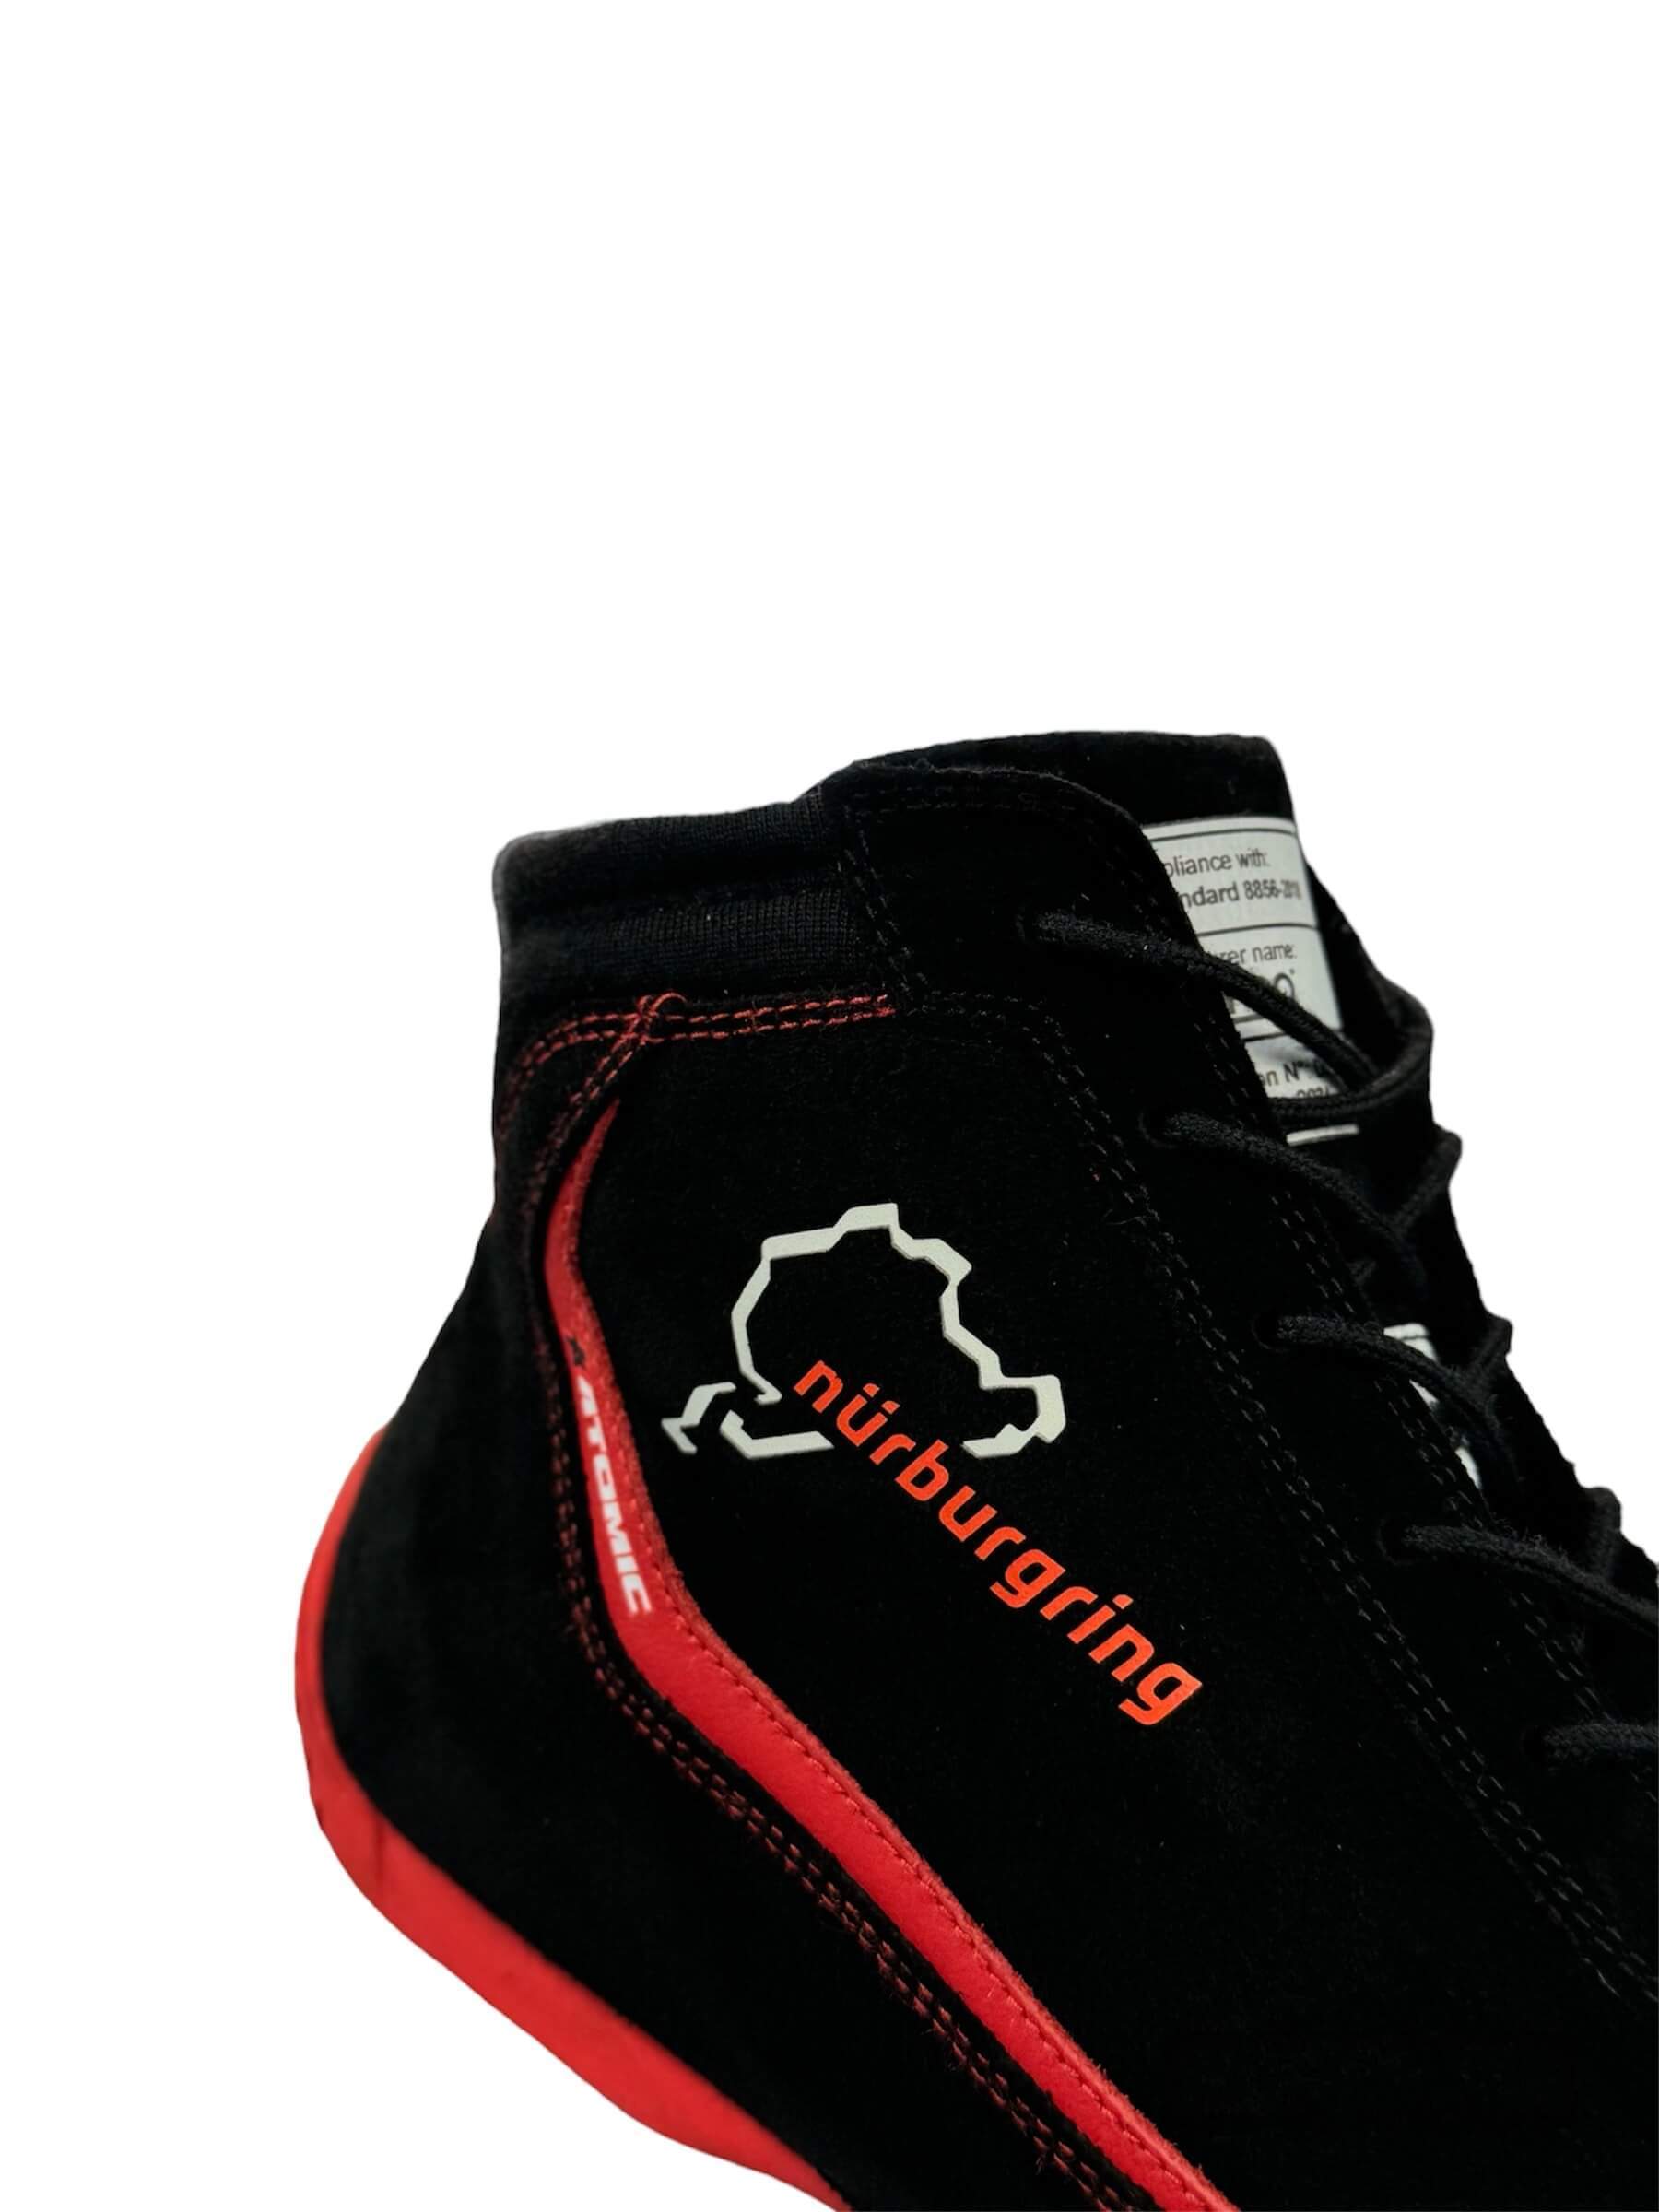 SPARCO 001295SP_NBR47 Shoes Slalom Nurburgring Edition black/red Size 47 Photo-4 